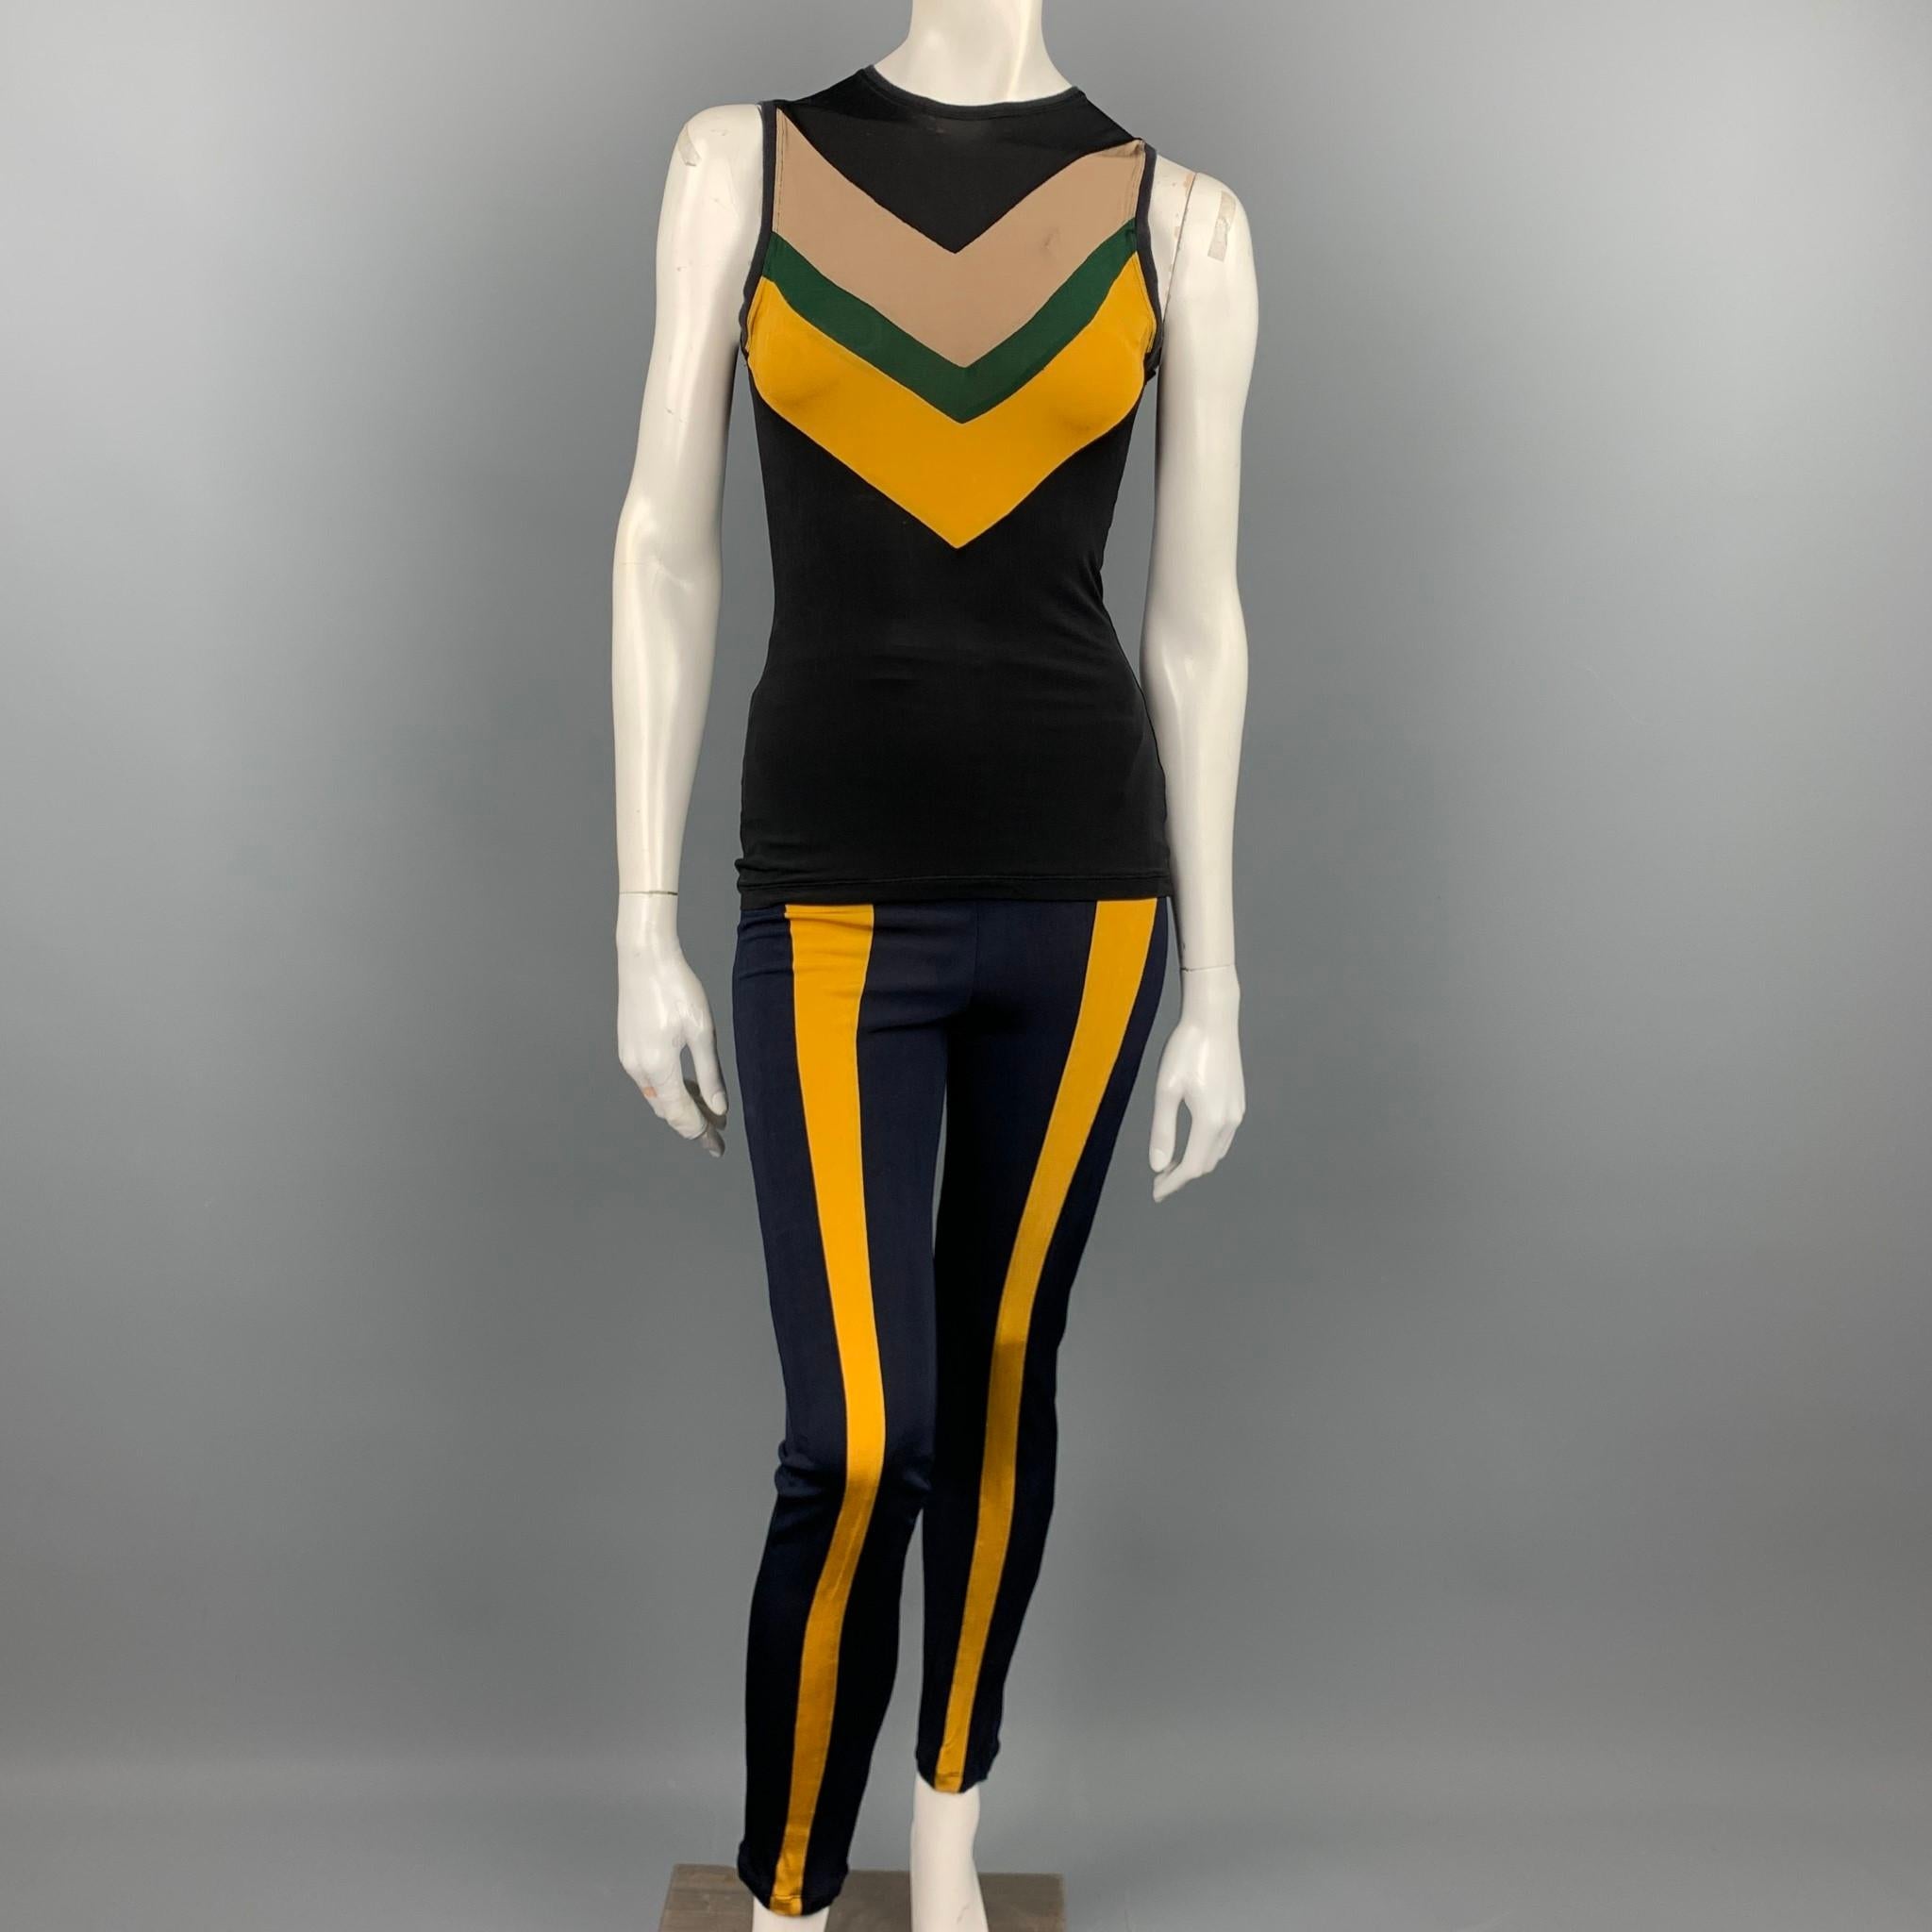 Vintage JUNIOR GAULTIER tank top set comes in a black & multi-color viscose blend with a color block design featuring a sleeveless style, crew-neck, and includes navy color block high waisted leggings. Minor wear. Made in Italy.

Good Pre-Owned